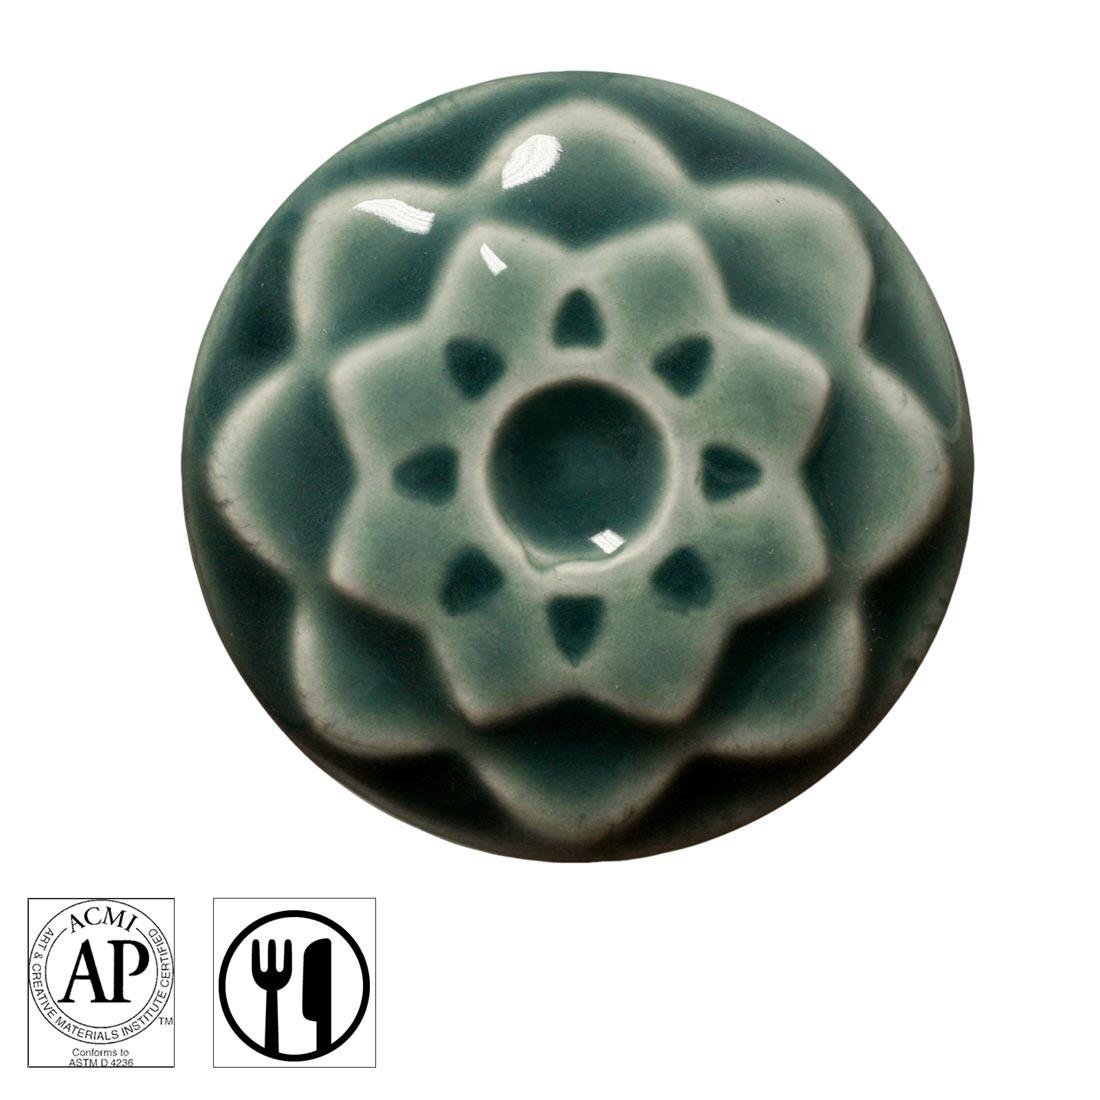 clay chip with Fog AMACO Celadon High Fire Transparent Gloss Glaze applied; symbols for AP Seal and food safe